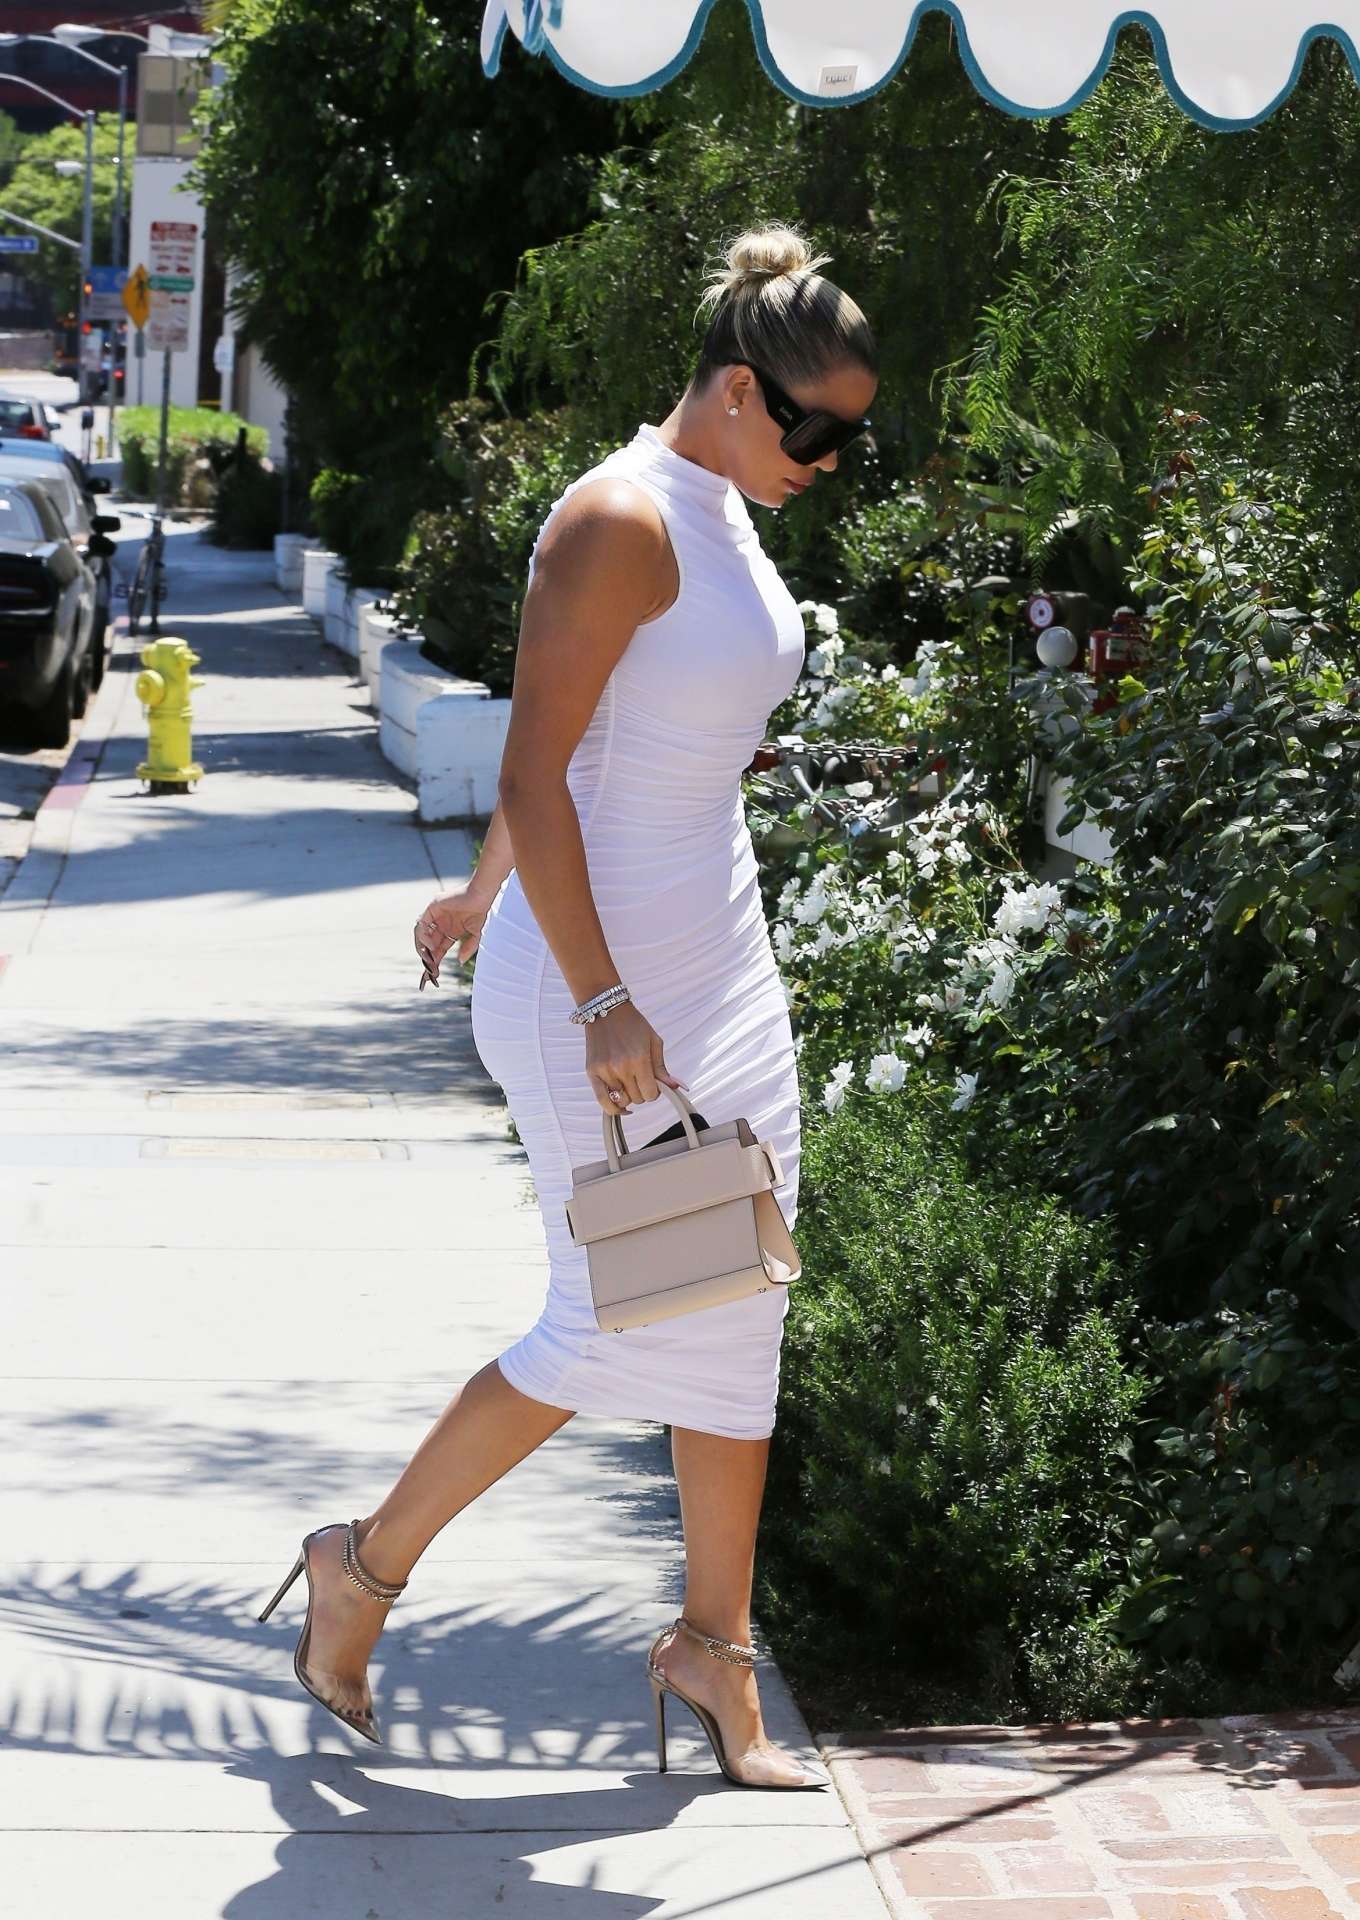 Khloe Kardashian â€“ In a white dress steps out for lunch in Beverly Hills